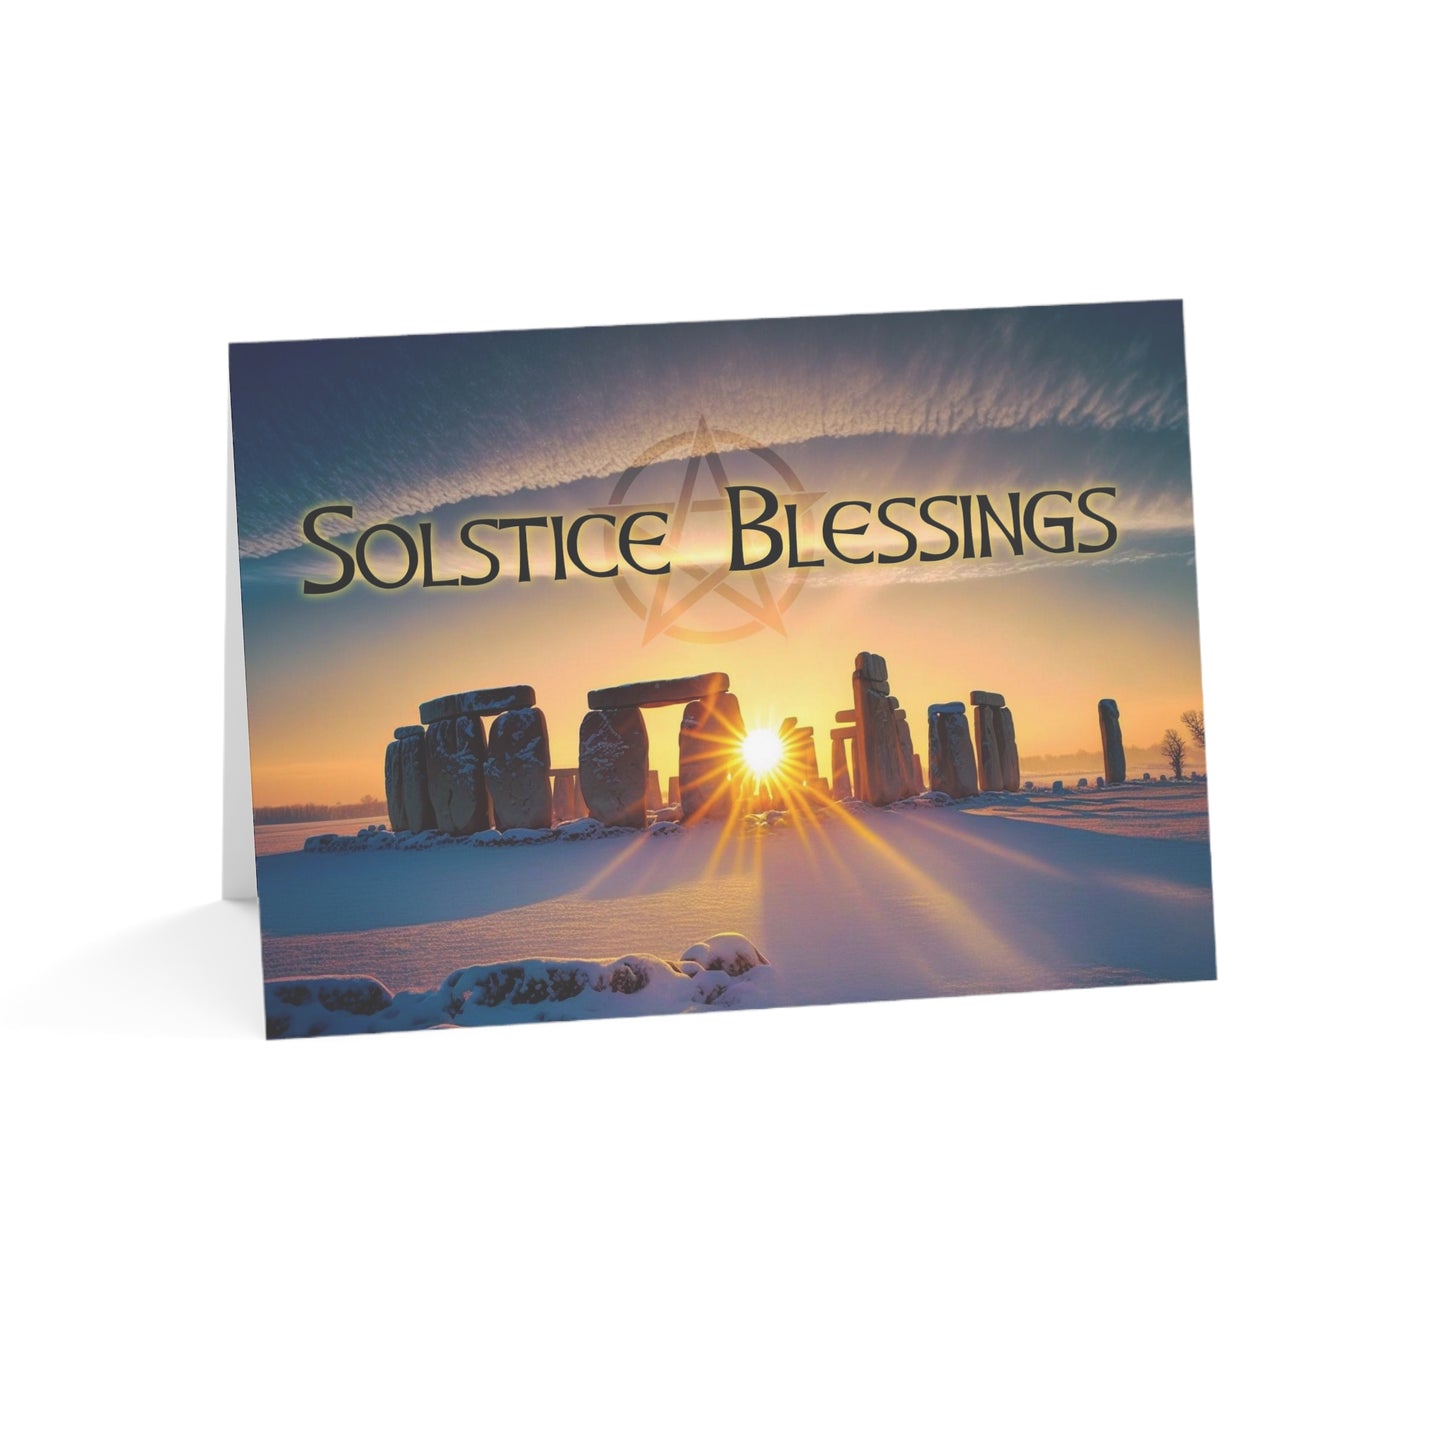 Stonehenge Winter Solstice Cards | Pagan Winter Solstice Yule Cards